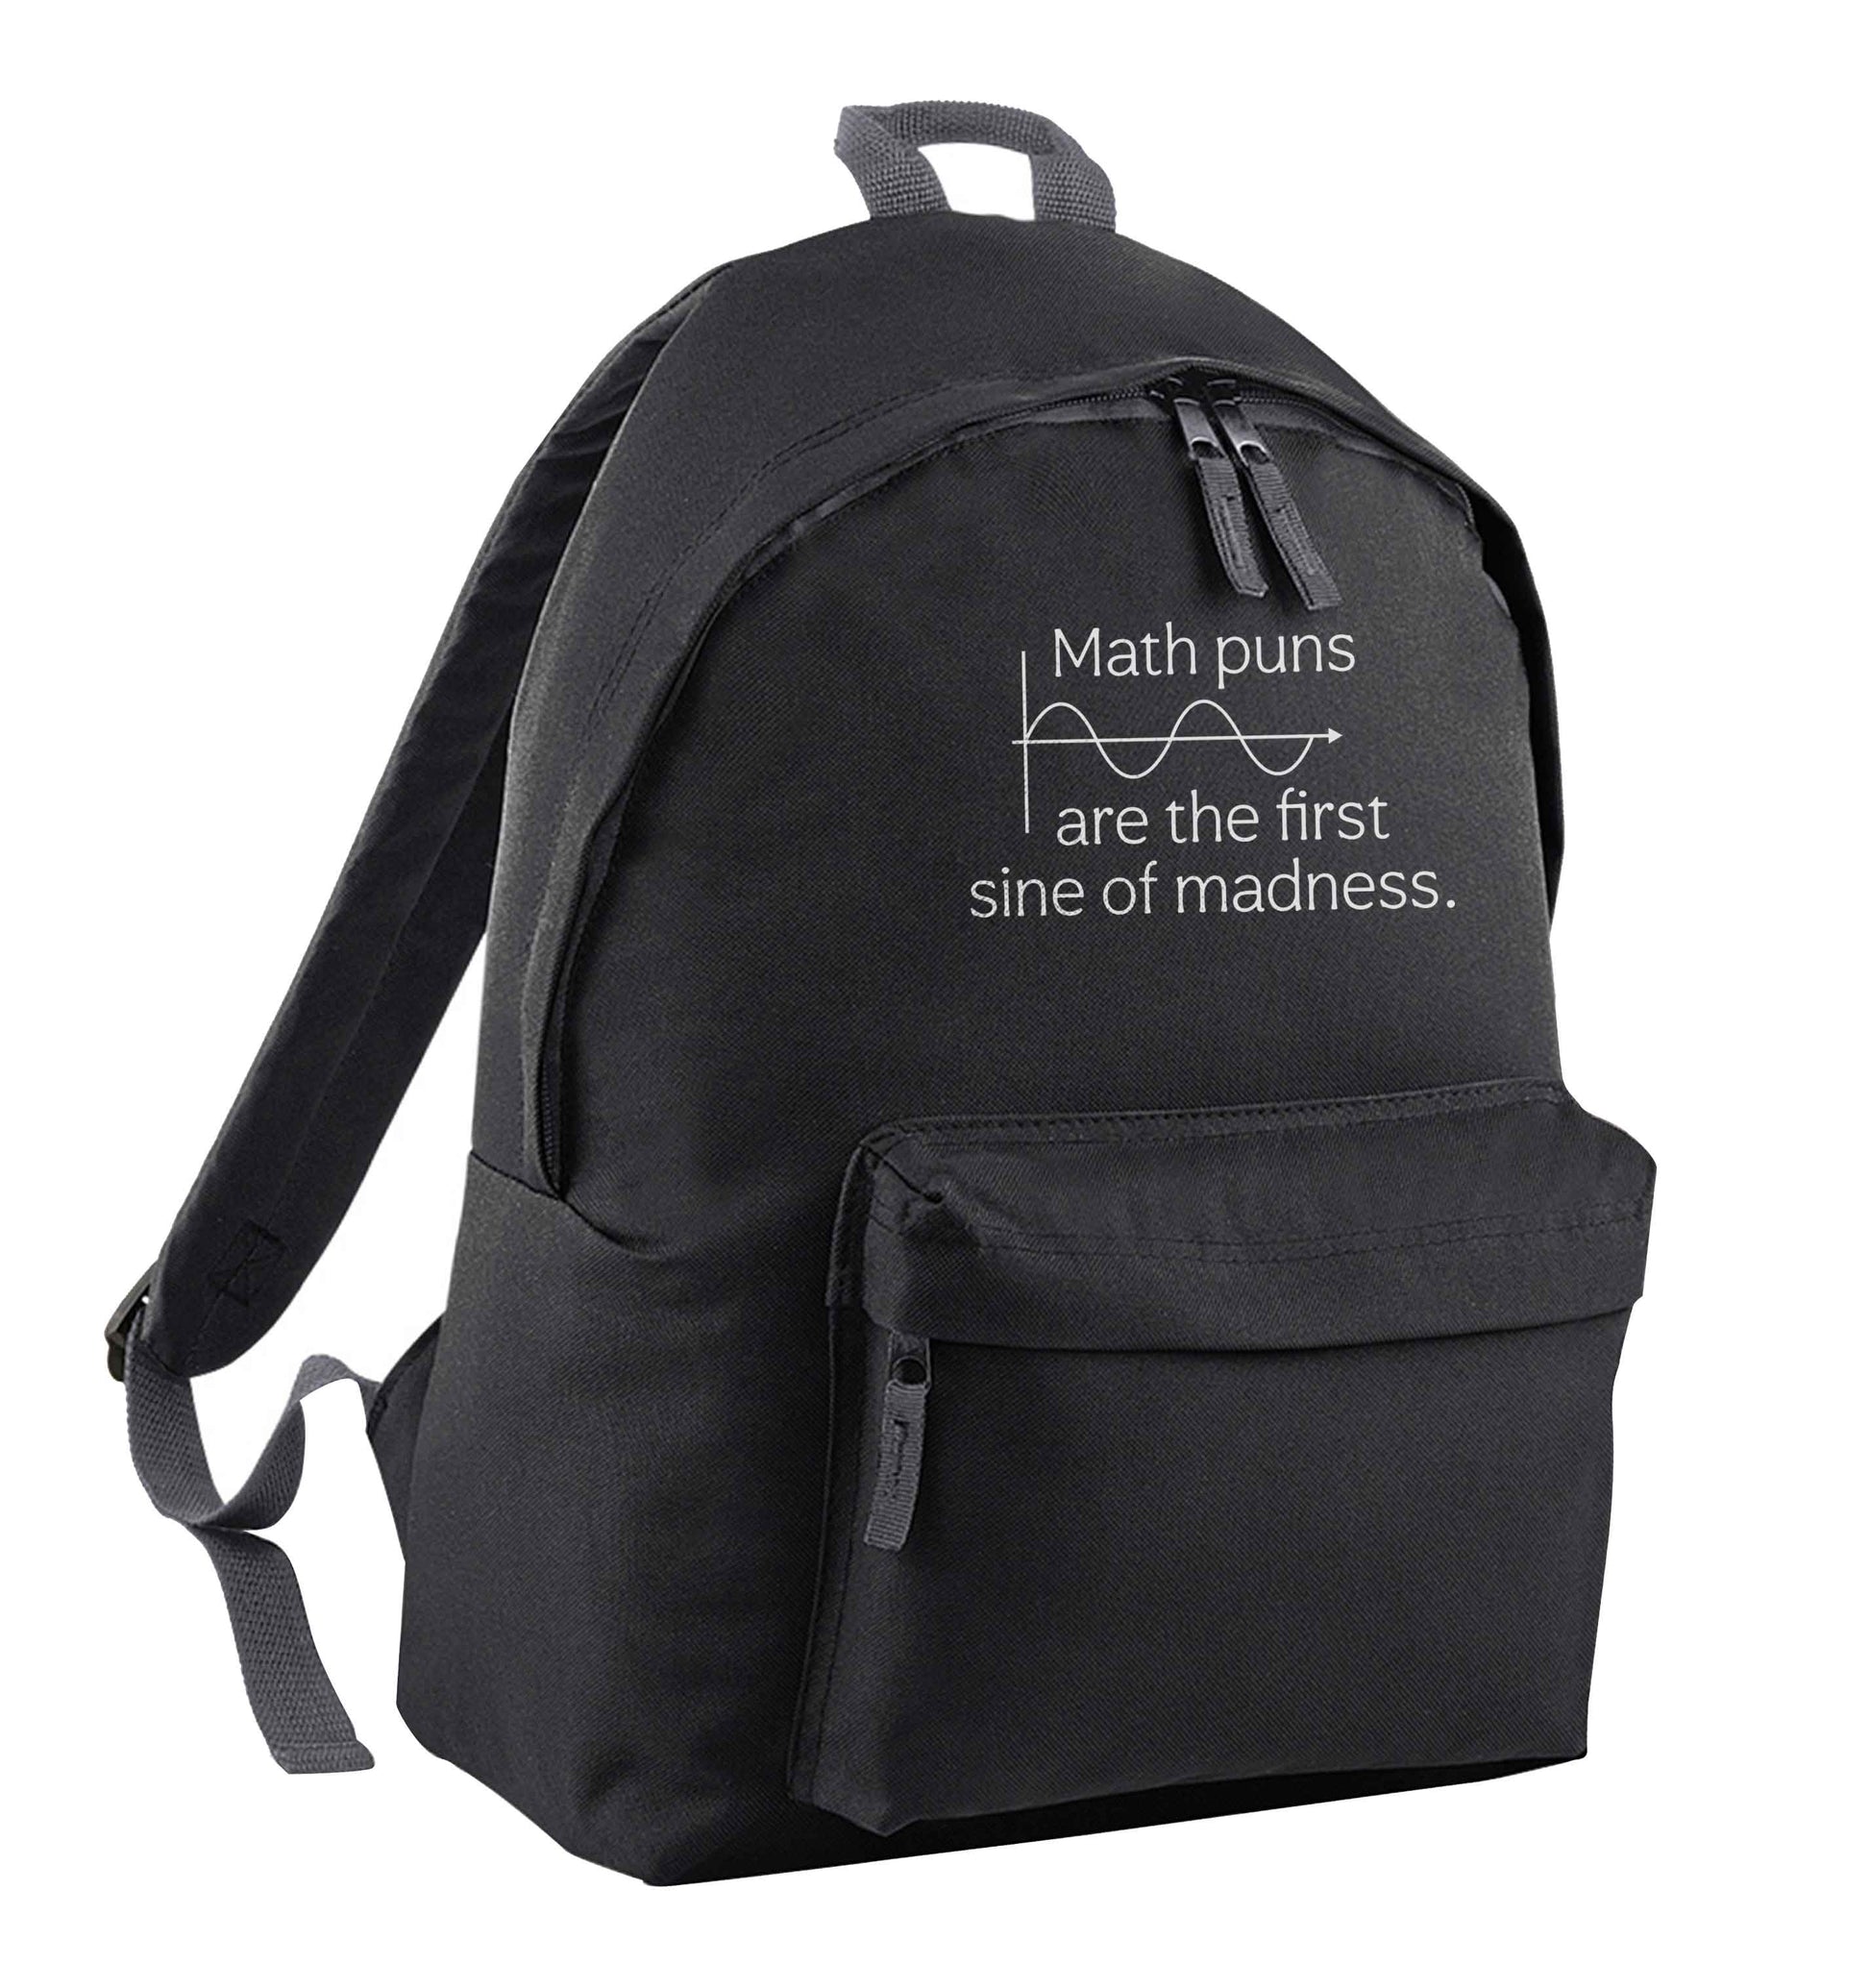 Math puns are the first sine of madness black children's backpack